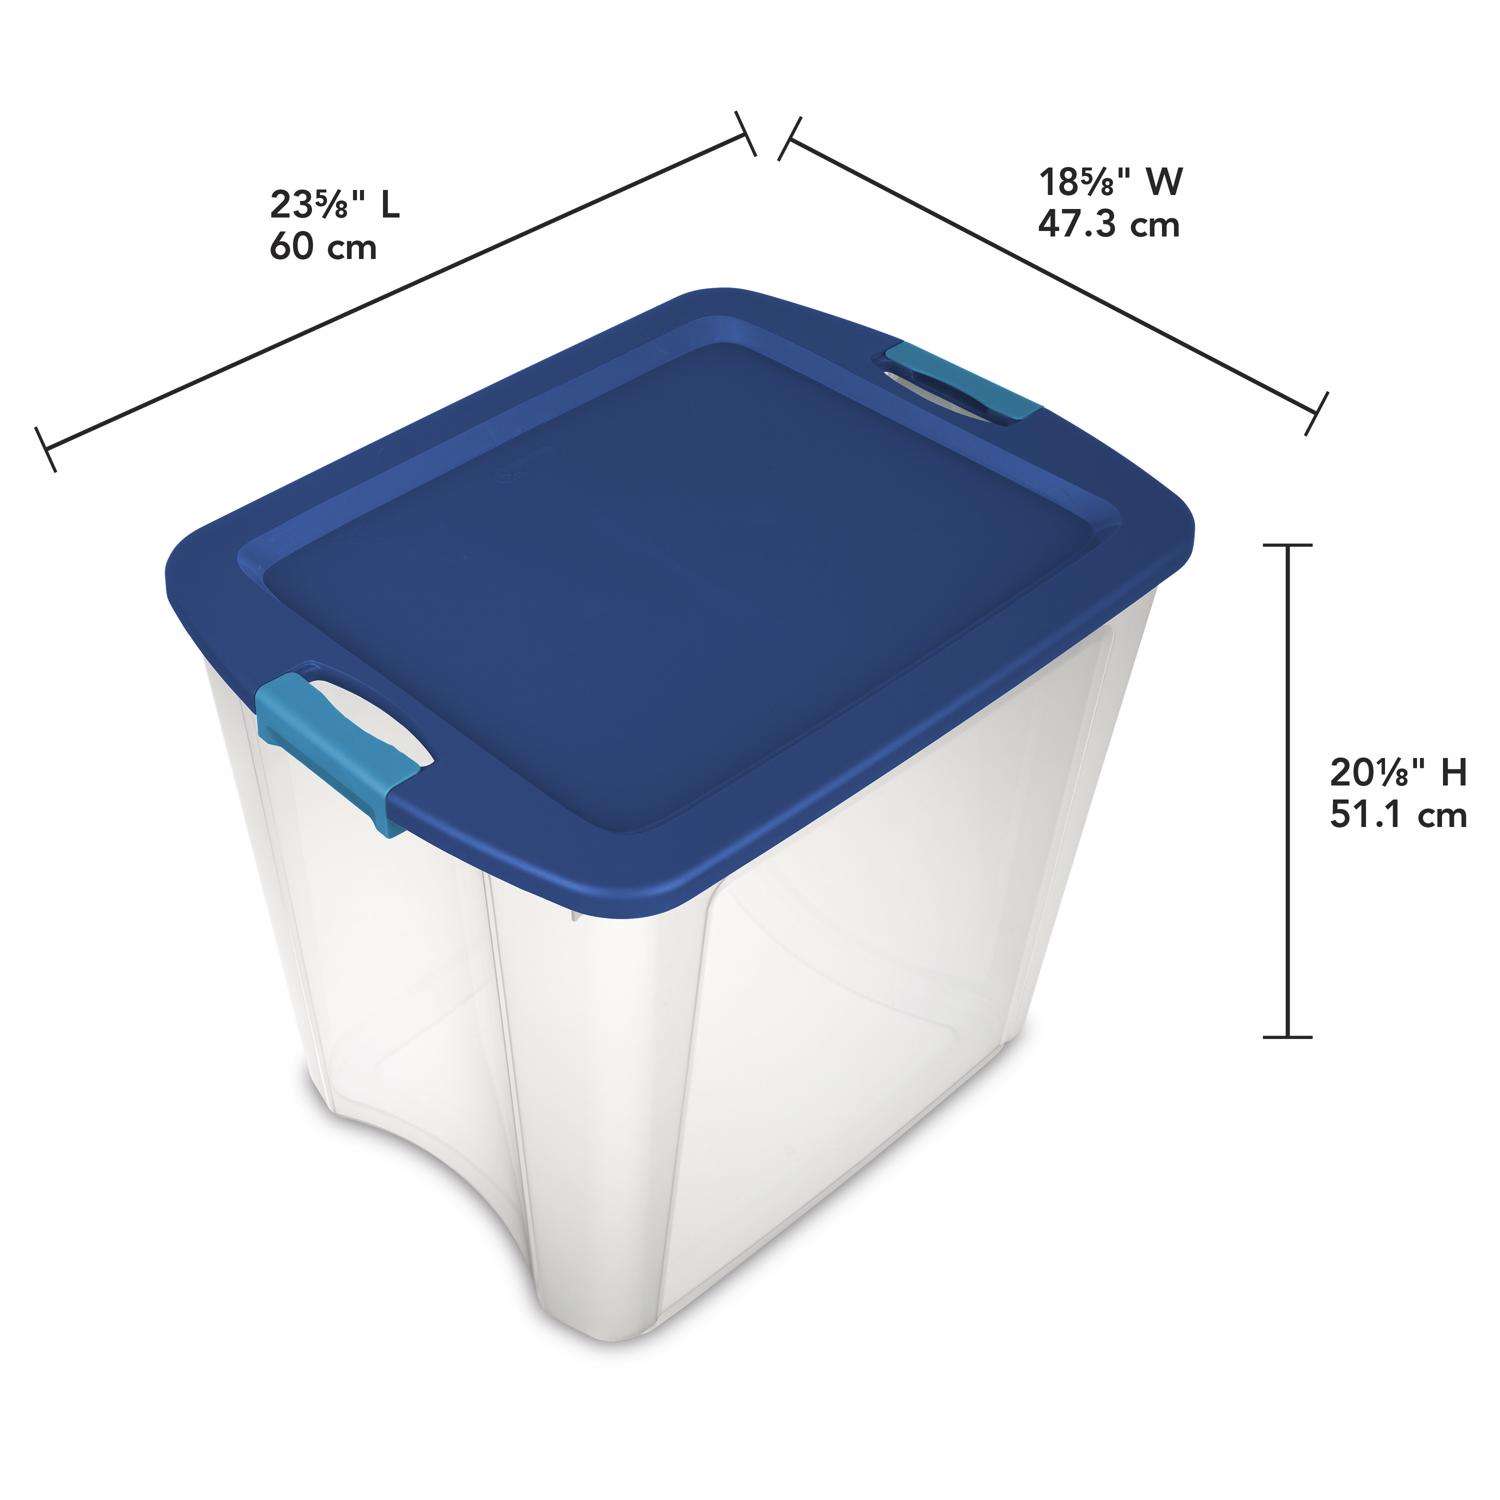 SEEKIND Storage Bins with lids, Water-Proof Storage Box Sets with  Handles,Multiple Sizes Foldable Plastic Storage Organizer for